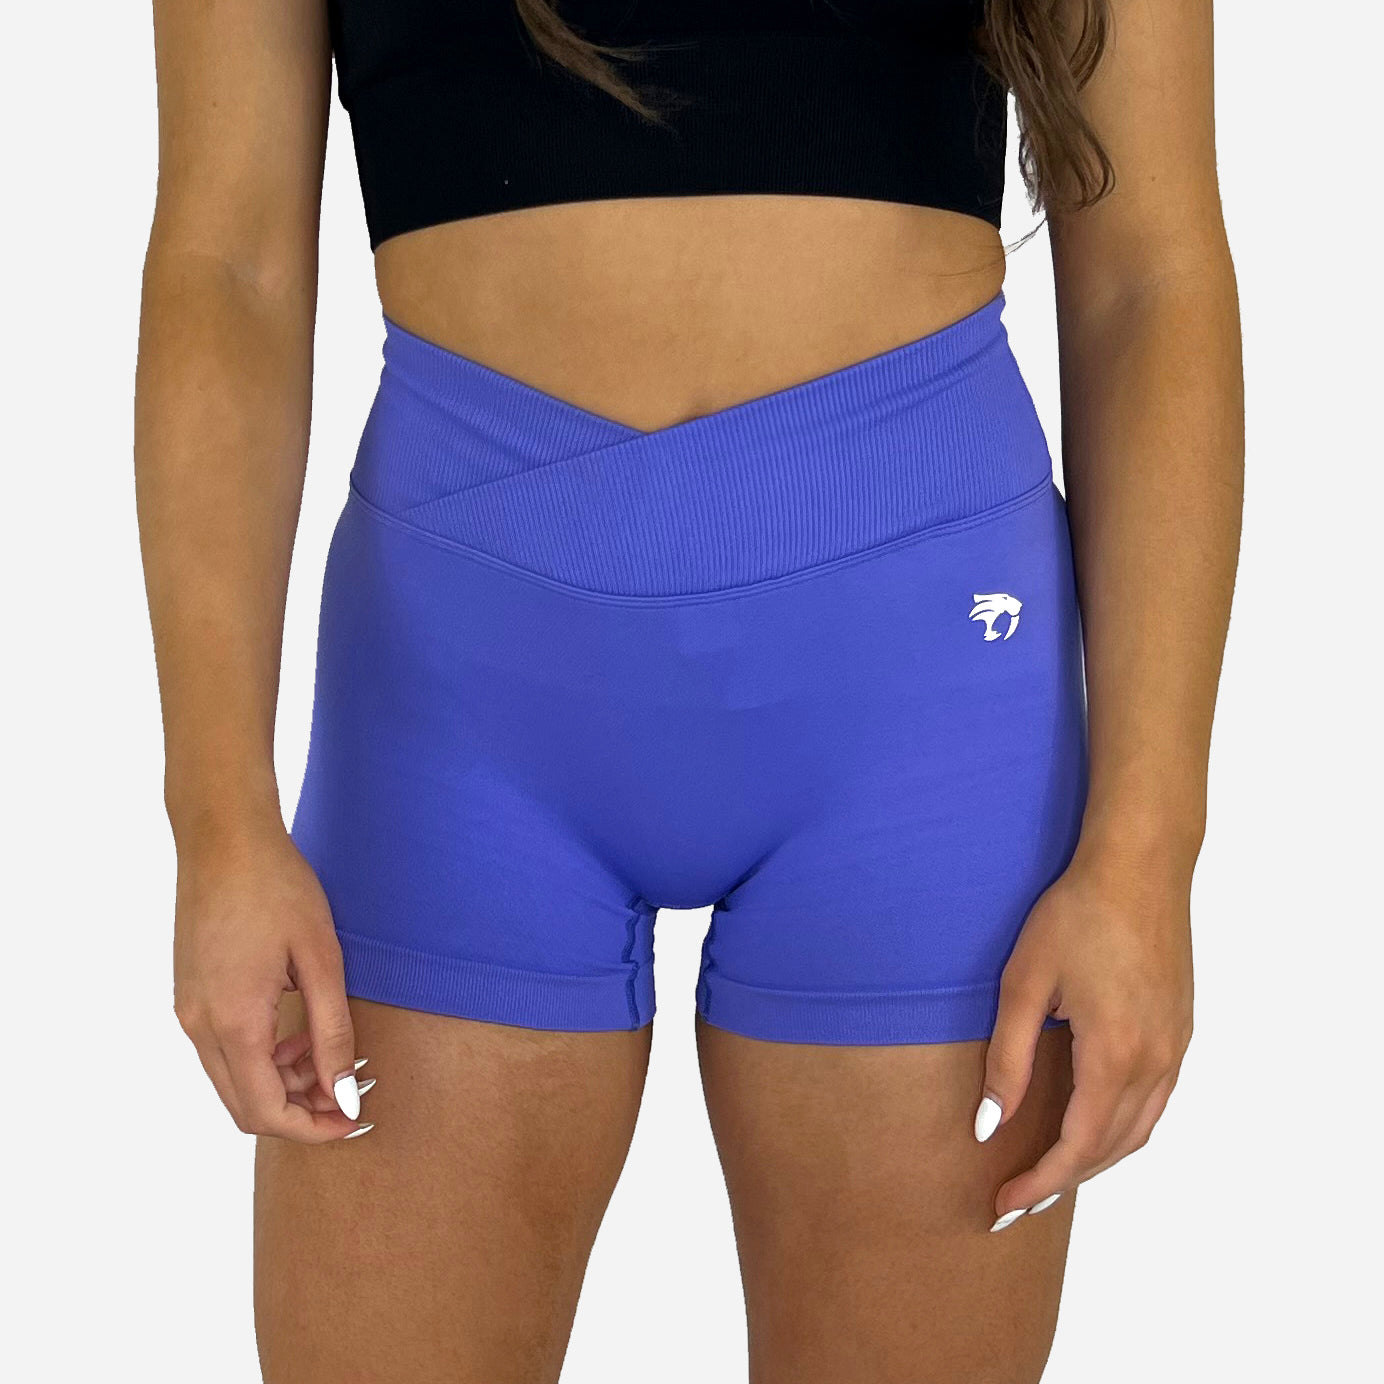 Sport Shorts for Women - Venus High-Rise Shorts for Gym and Yoga